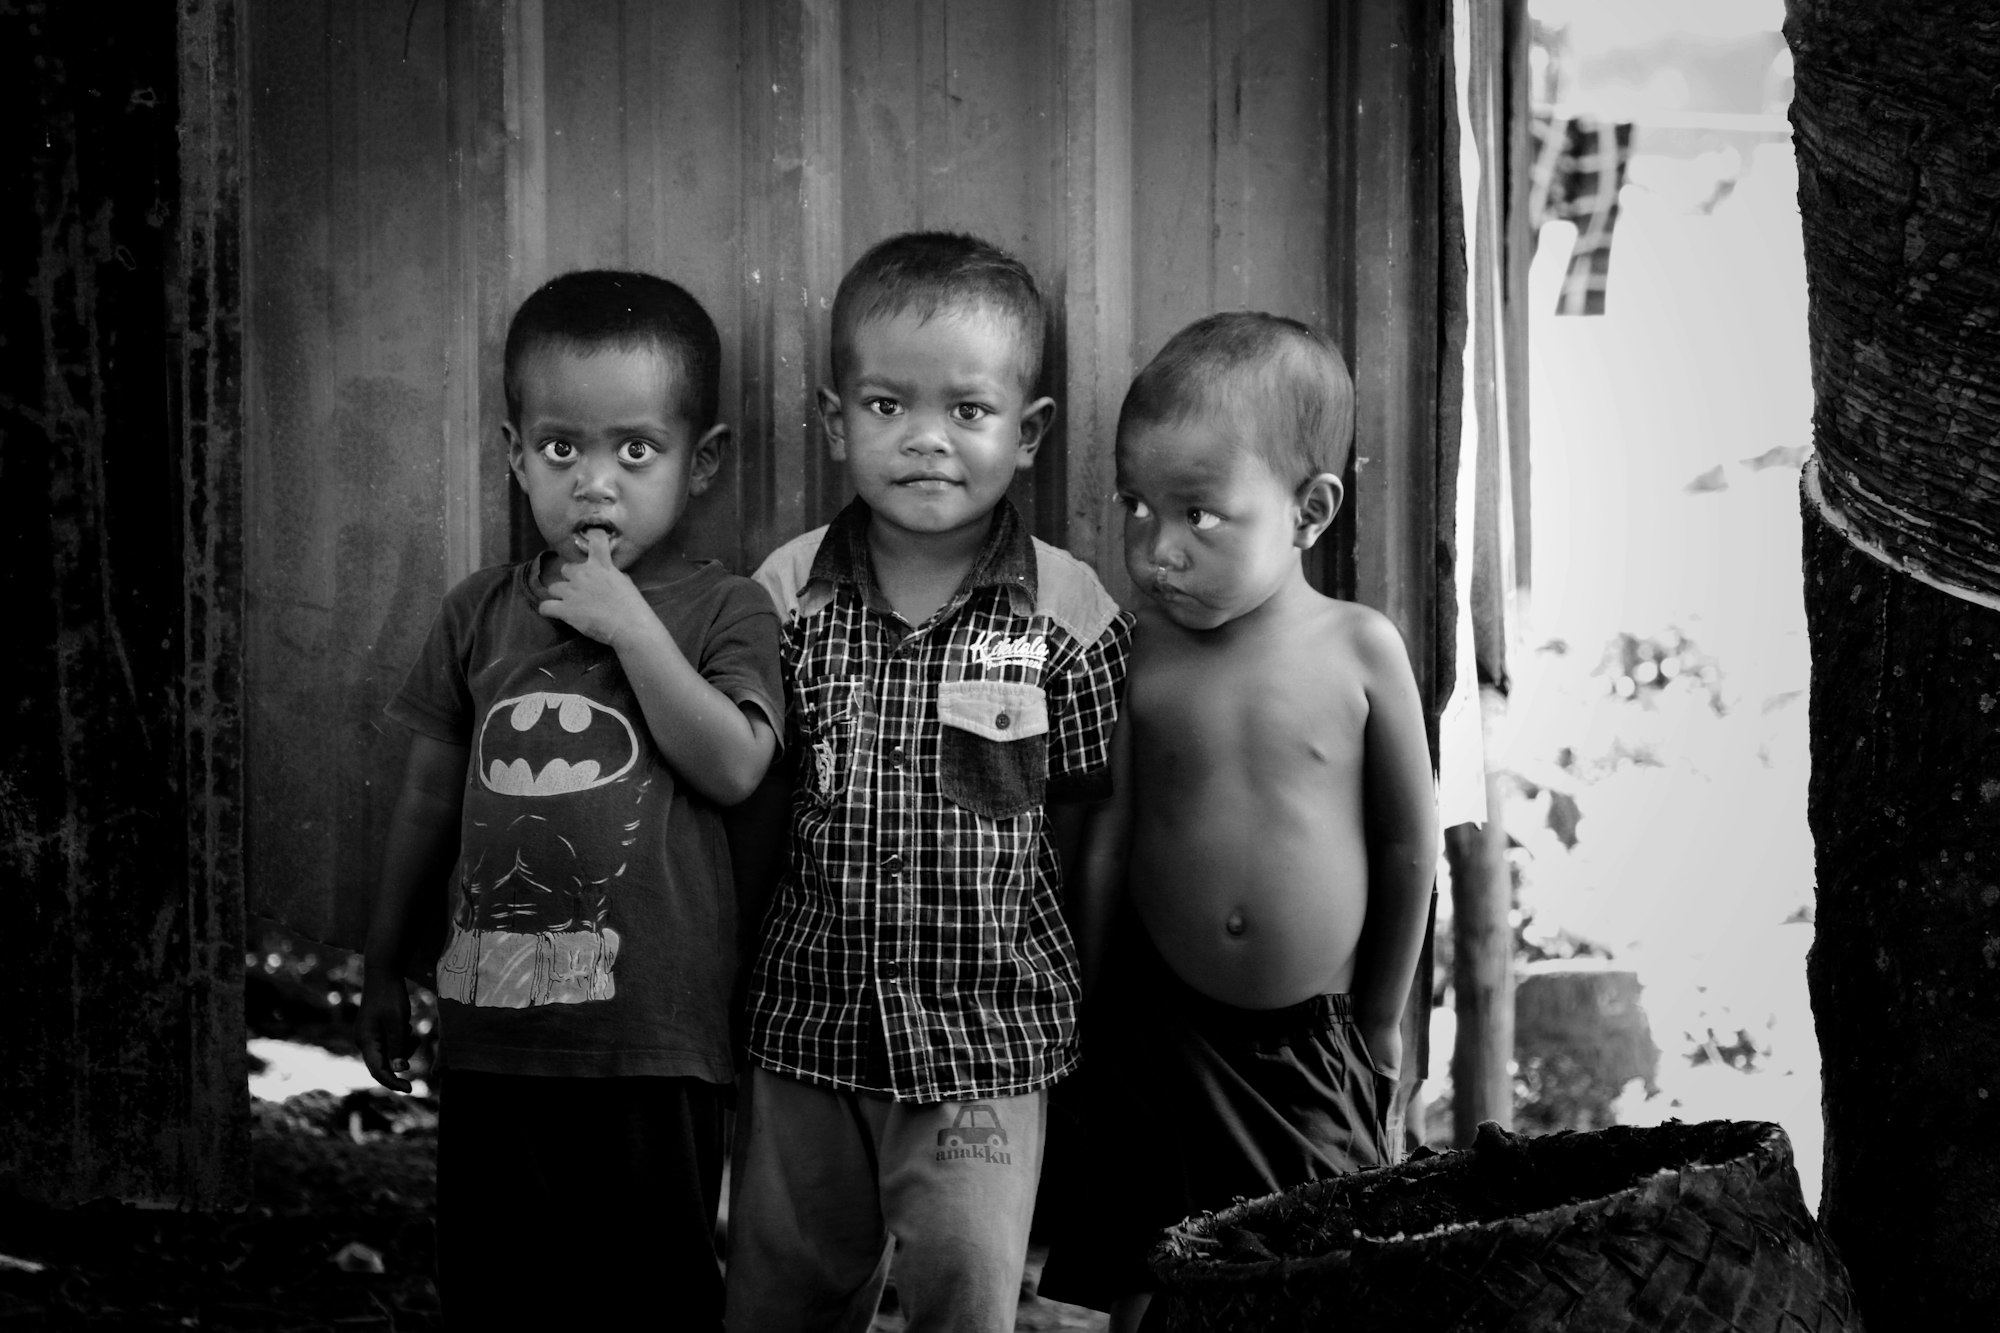 they are a bunch of cheeky fellows but in reality, they are in need of basic necessities. the photo was taken during a humanitarian project in a village away from the city of Kuantan, Pahang. 